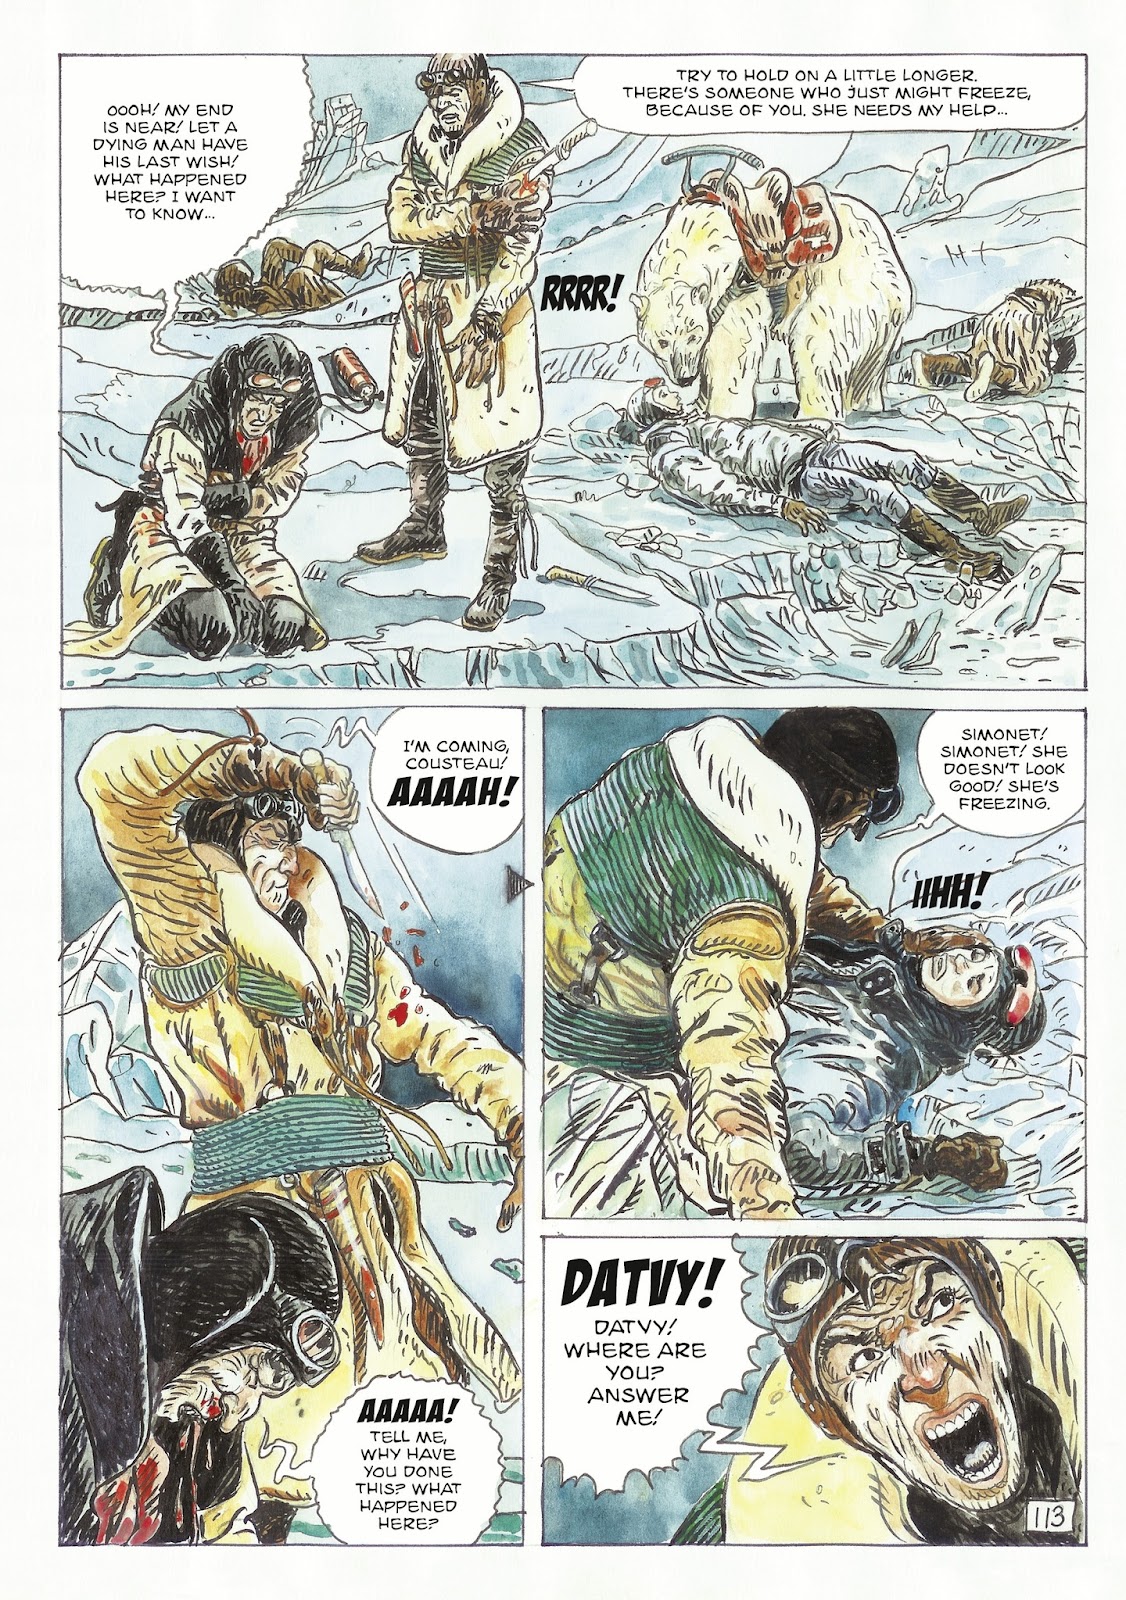 The Man With the Bear issue 2 - Page 59